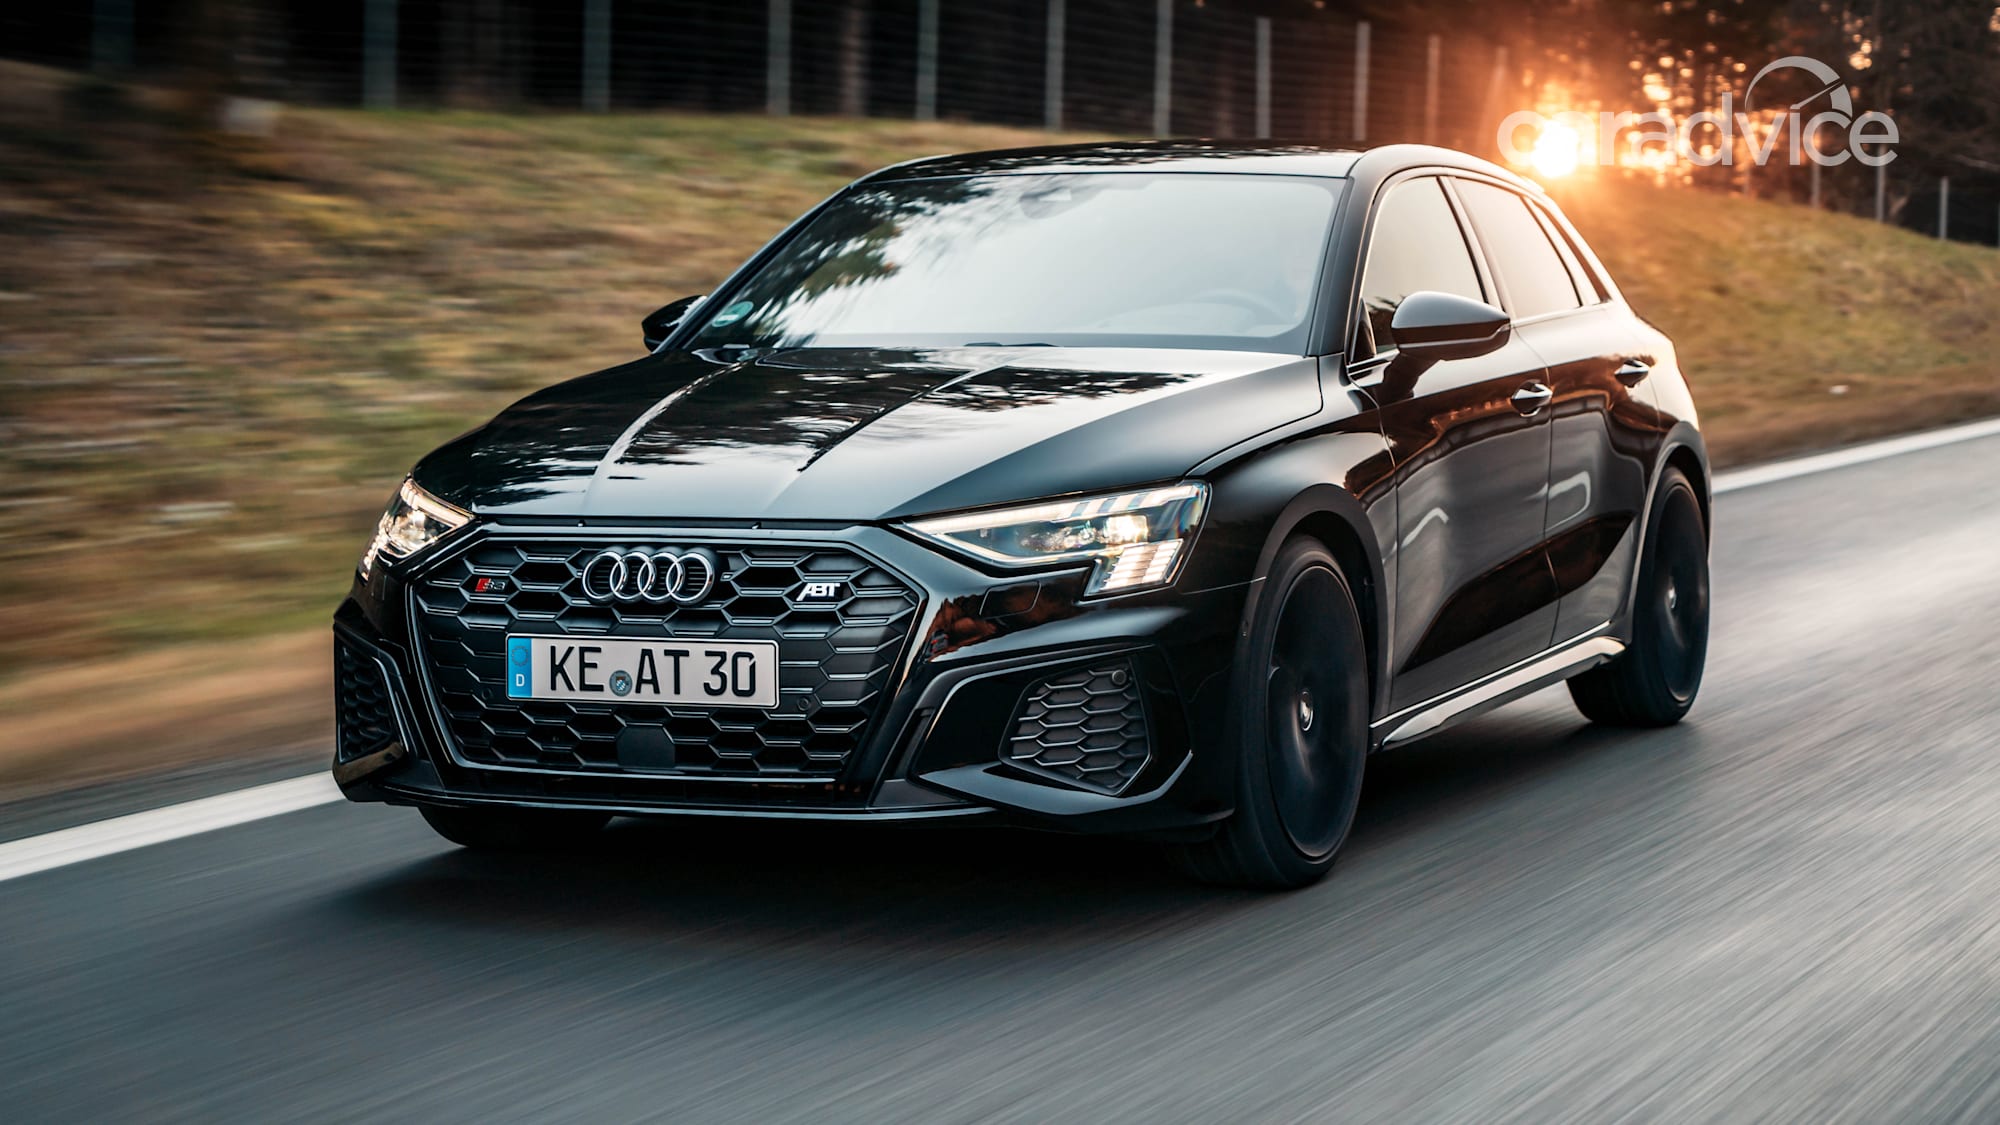 2021 Audi S3 receives 272kW Abt tuning treatment | CarAdvice